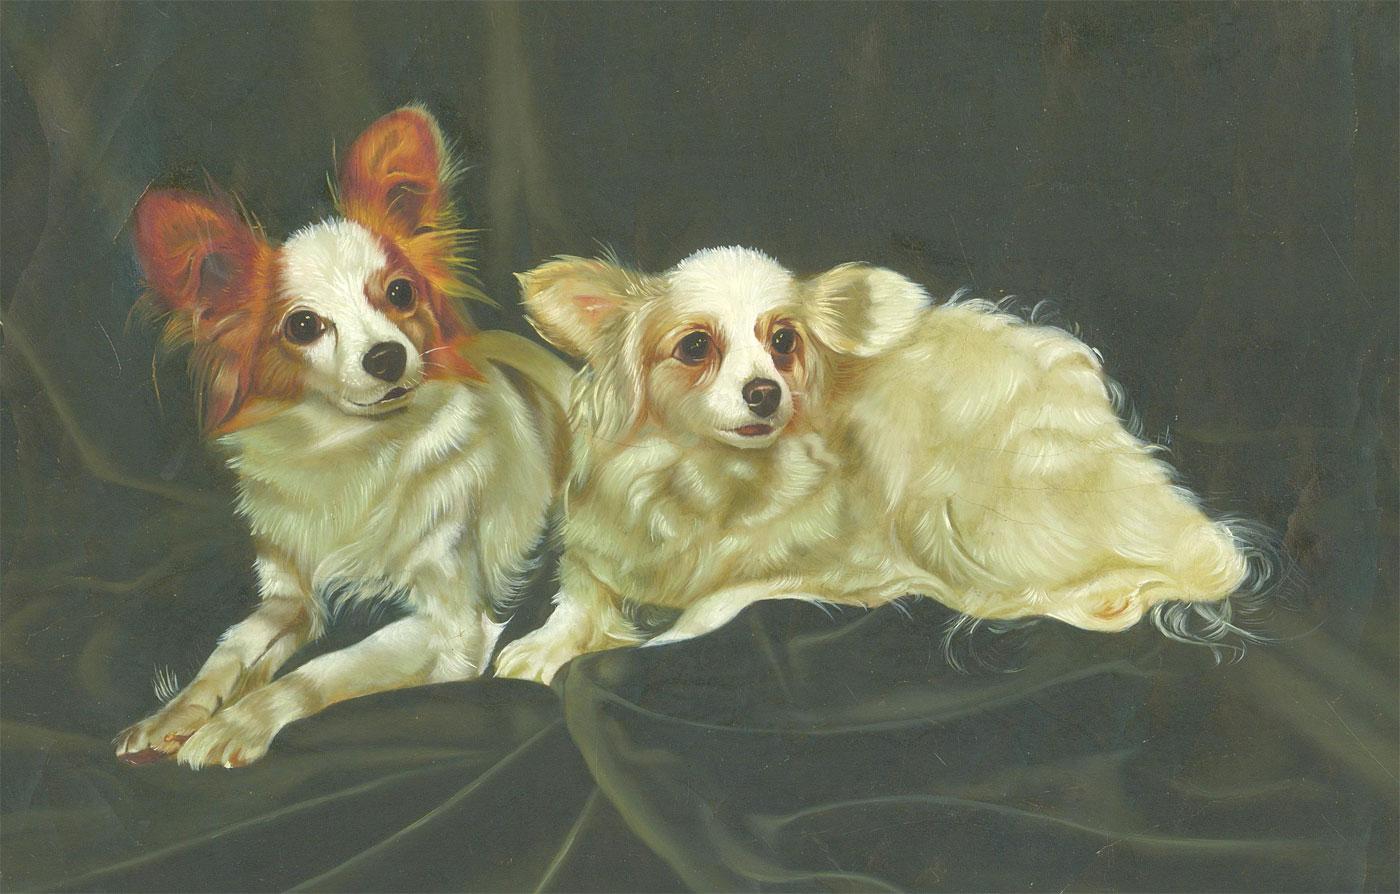 A delightful oil study of two Papillon dogs resting on a green cloth and looking curiously behind us. Unsigned. On canvas paper.